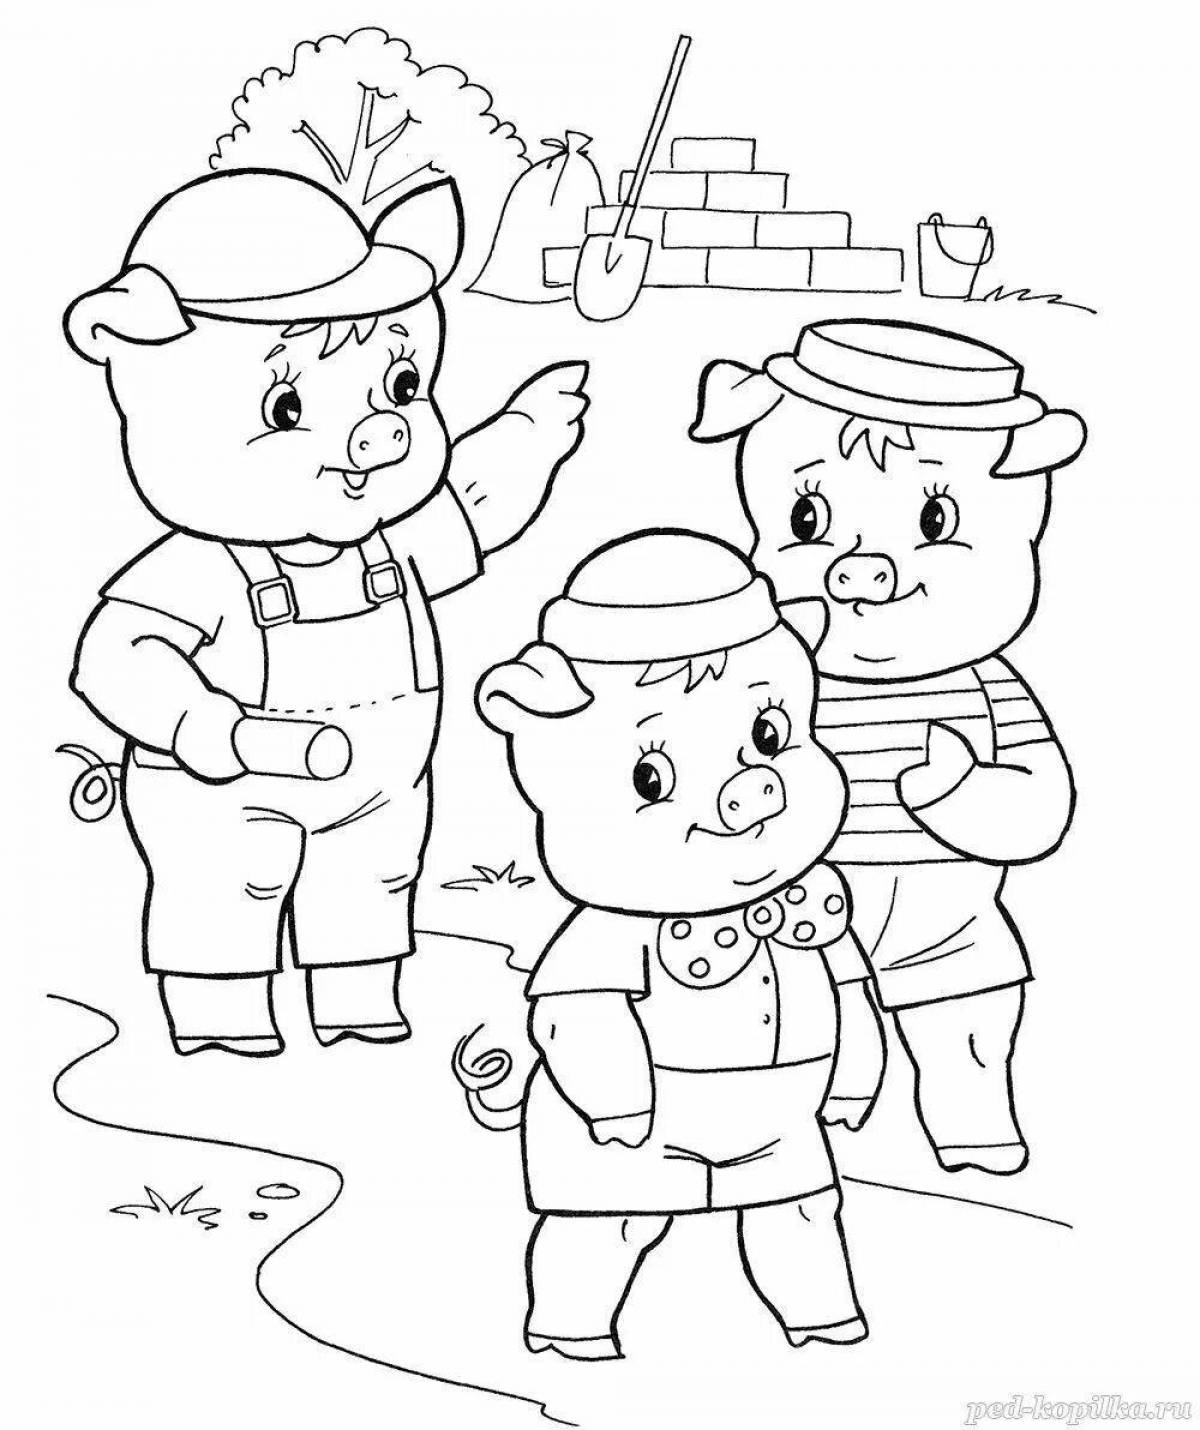 Cute Mikhalkov coloring for kids